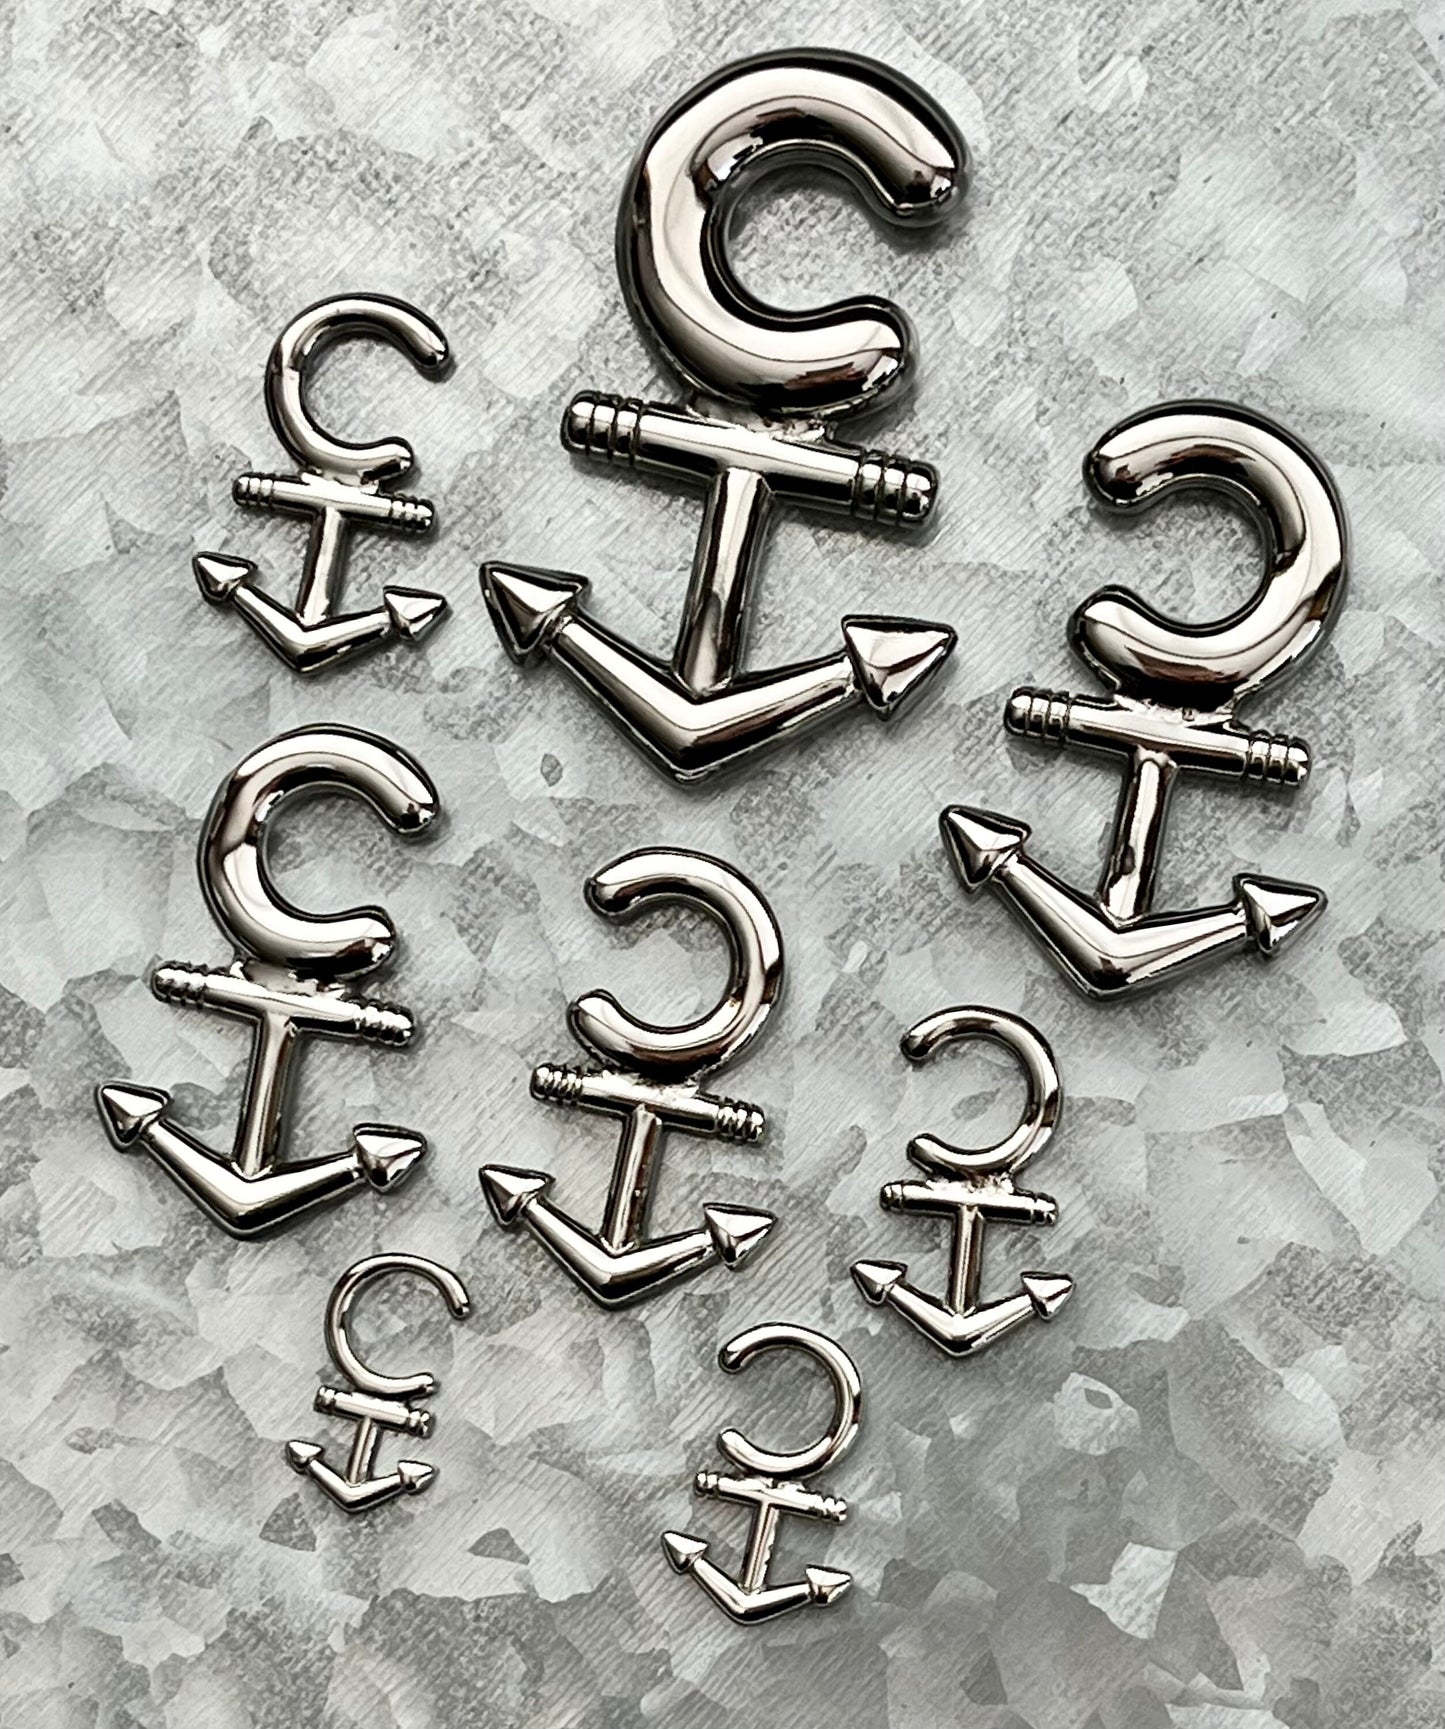 PAIR of Nautical Anchor 316L Surgical Steel Hanging Tapers Expanders - Gauges 14g (1.6mm) thru 0g (8mm) Available!